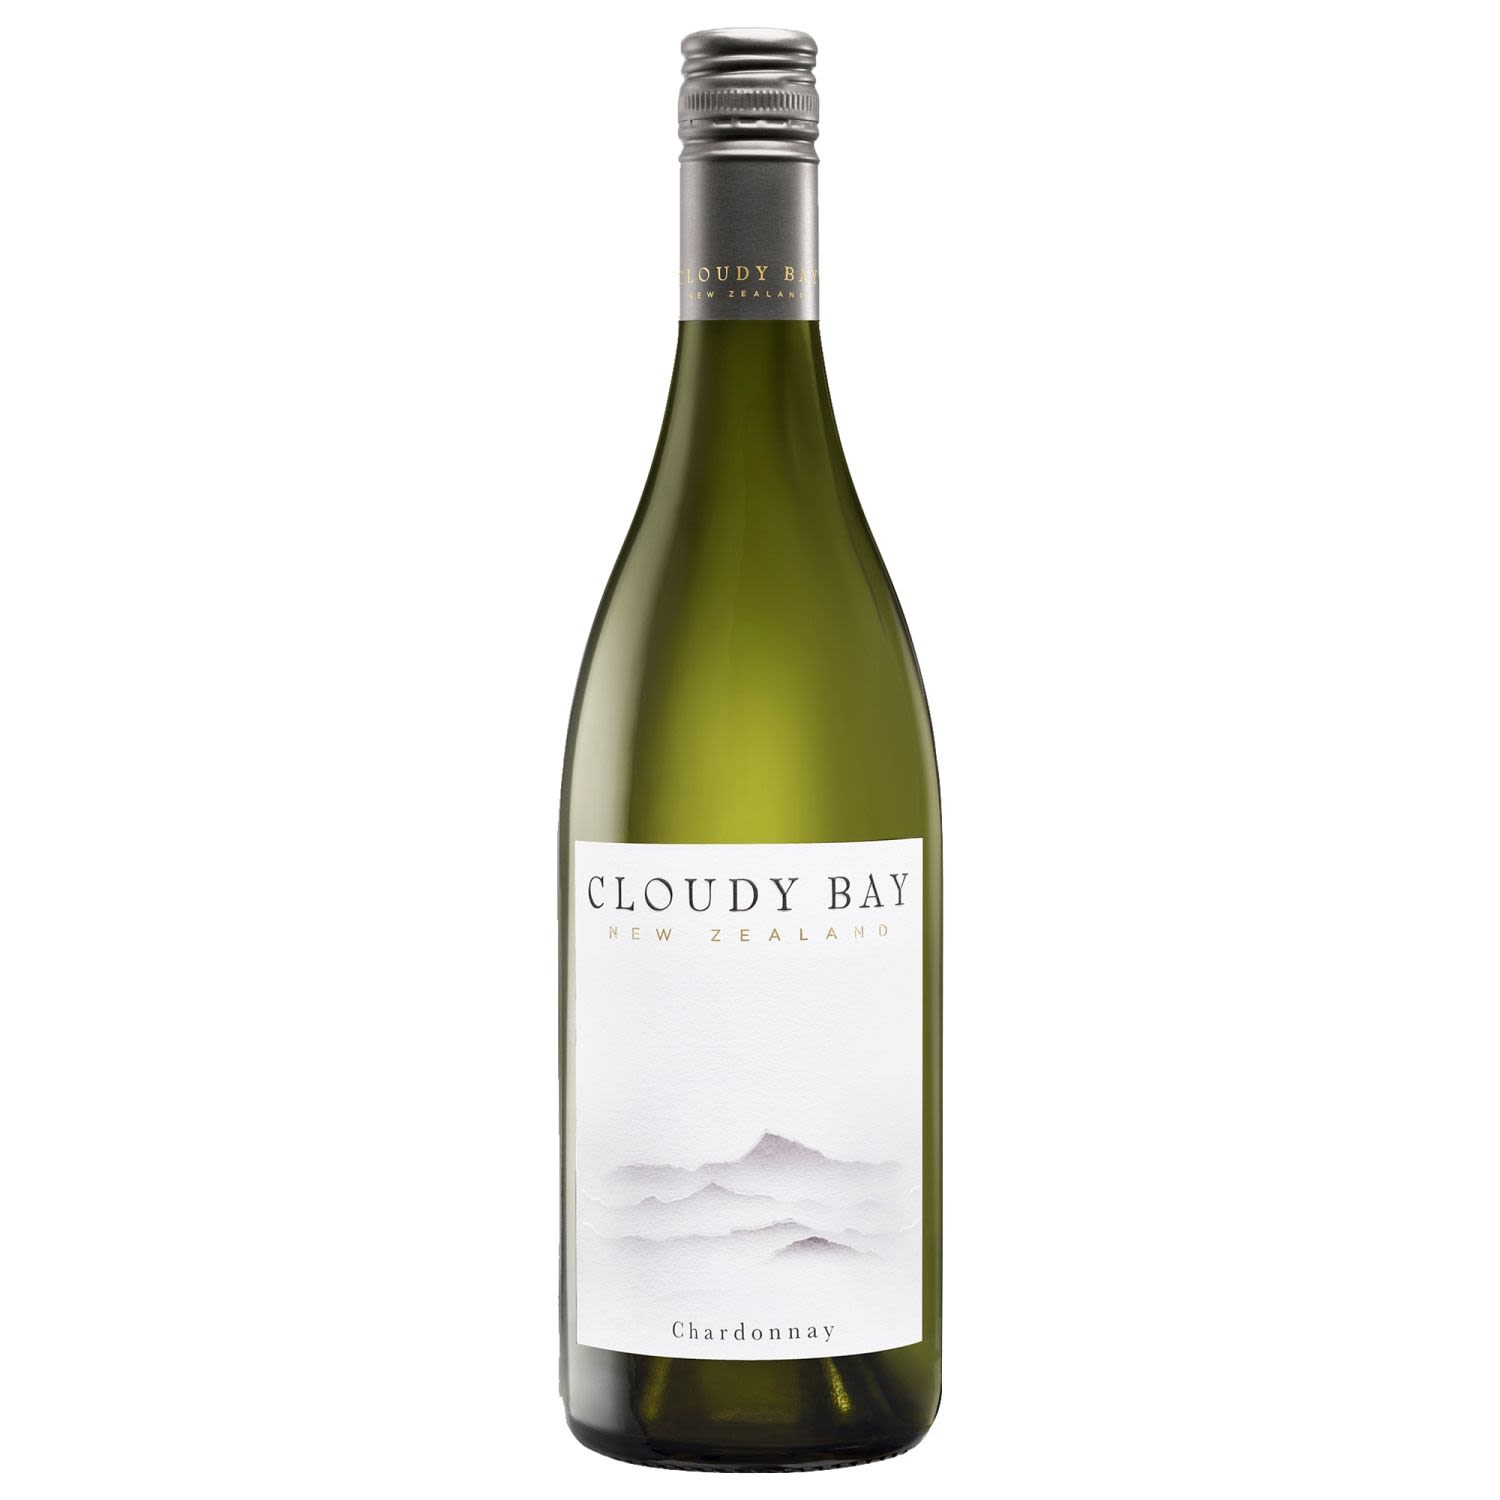 Established in 1985, Cloudy Bay was one of the first five wine makers to venture into Marlborough. Chardonnay, the widespread international aromatic grape variety has proudly been part of the portfolio since 1986. It is fragrant, textured & elegant.<br /> <br />Alcohol Volume: 13.50%<br /><br />Pack Format: Bottle<br /><br />Standard Drinks: 8.3</br /><br />Pack Type: Bottle<br /><br />Country of Origin: New Zealand<br /><br />Region: Marlborough<br /><br />Vintage: '2017<br />